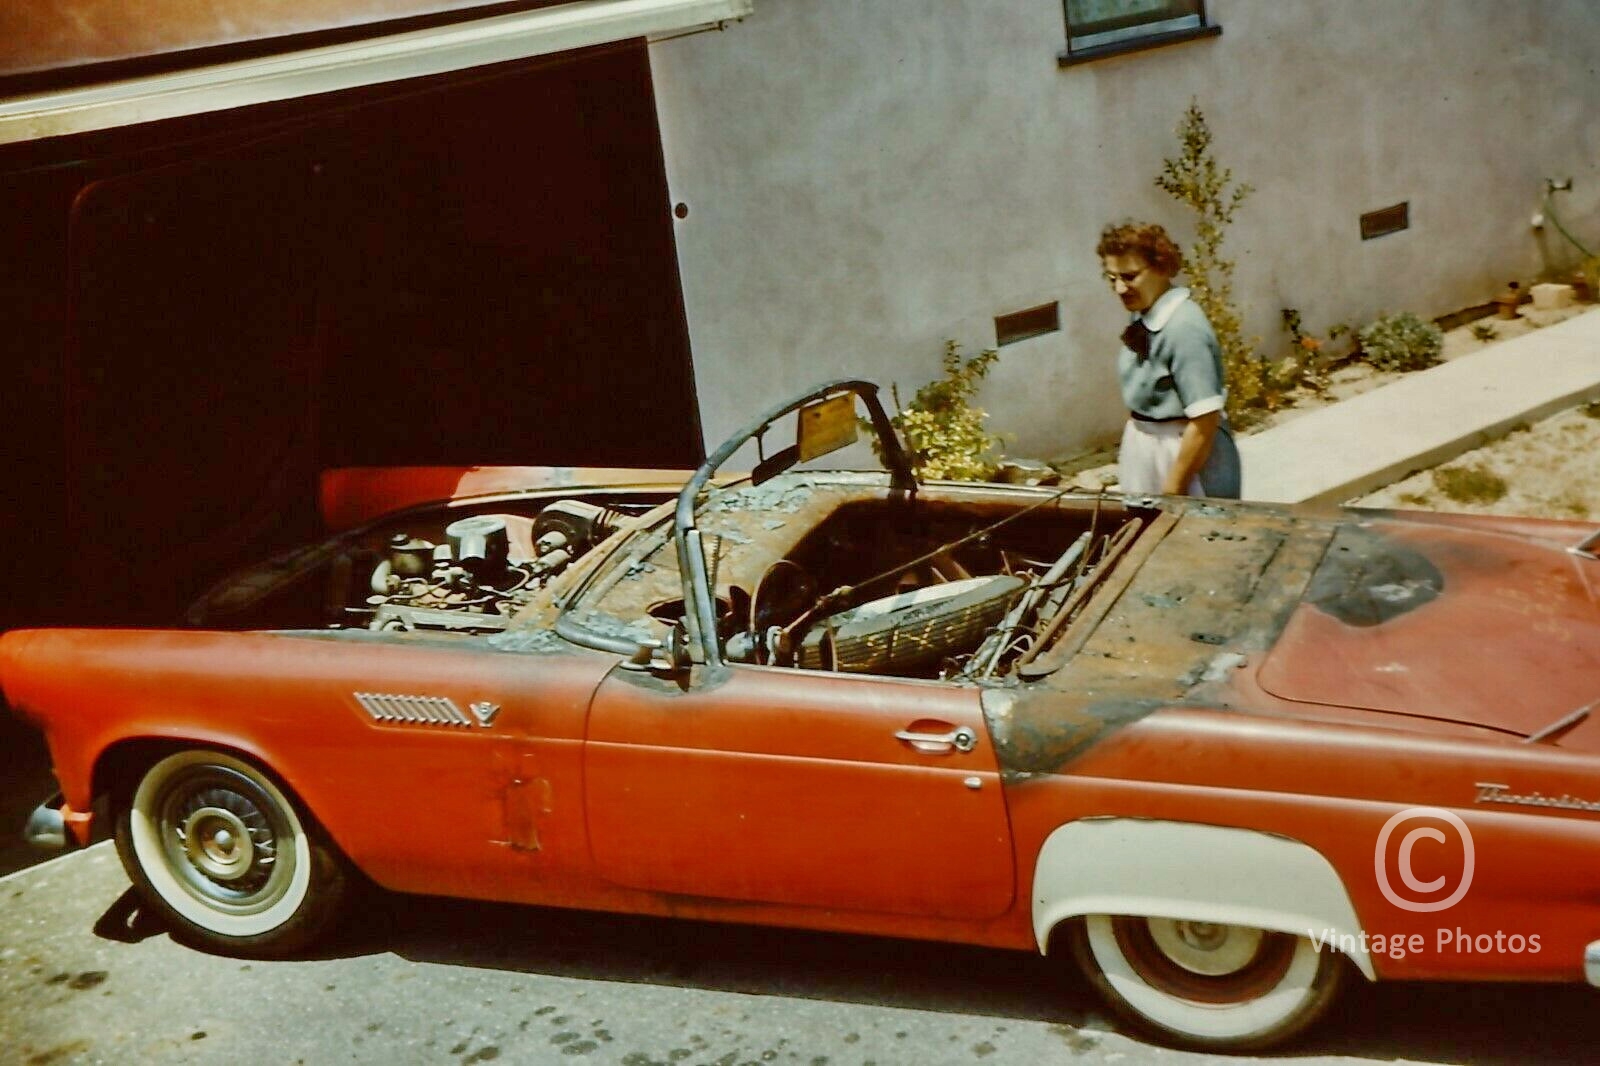 1950s - Burnt out Red Thunderbird